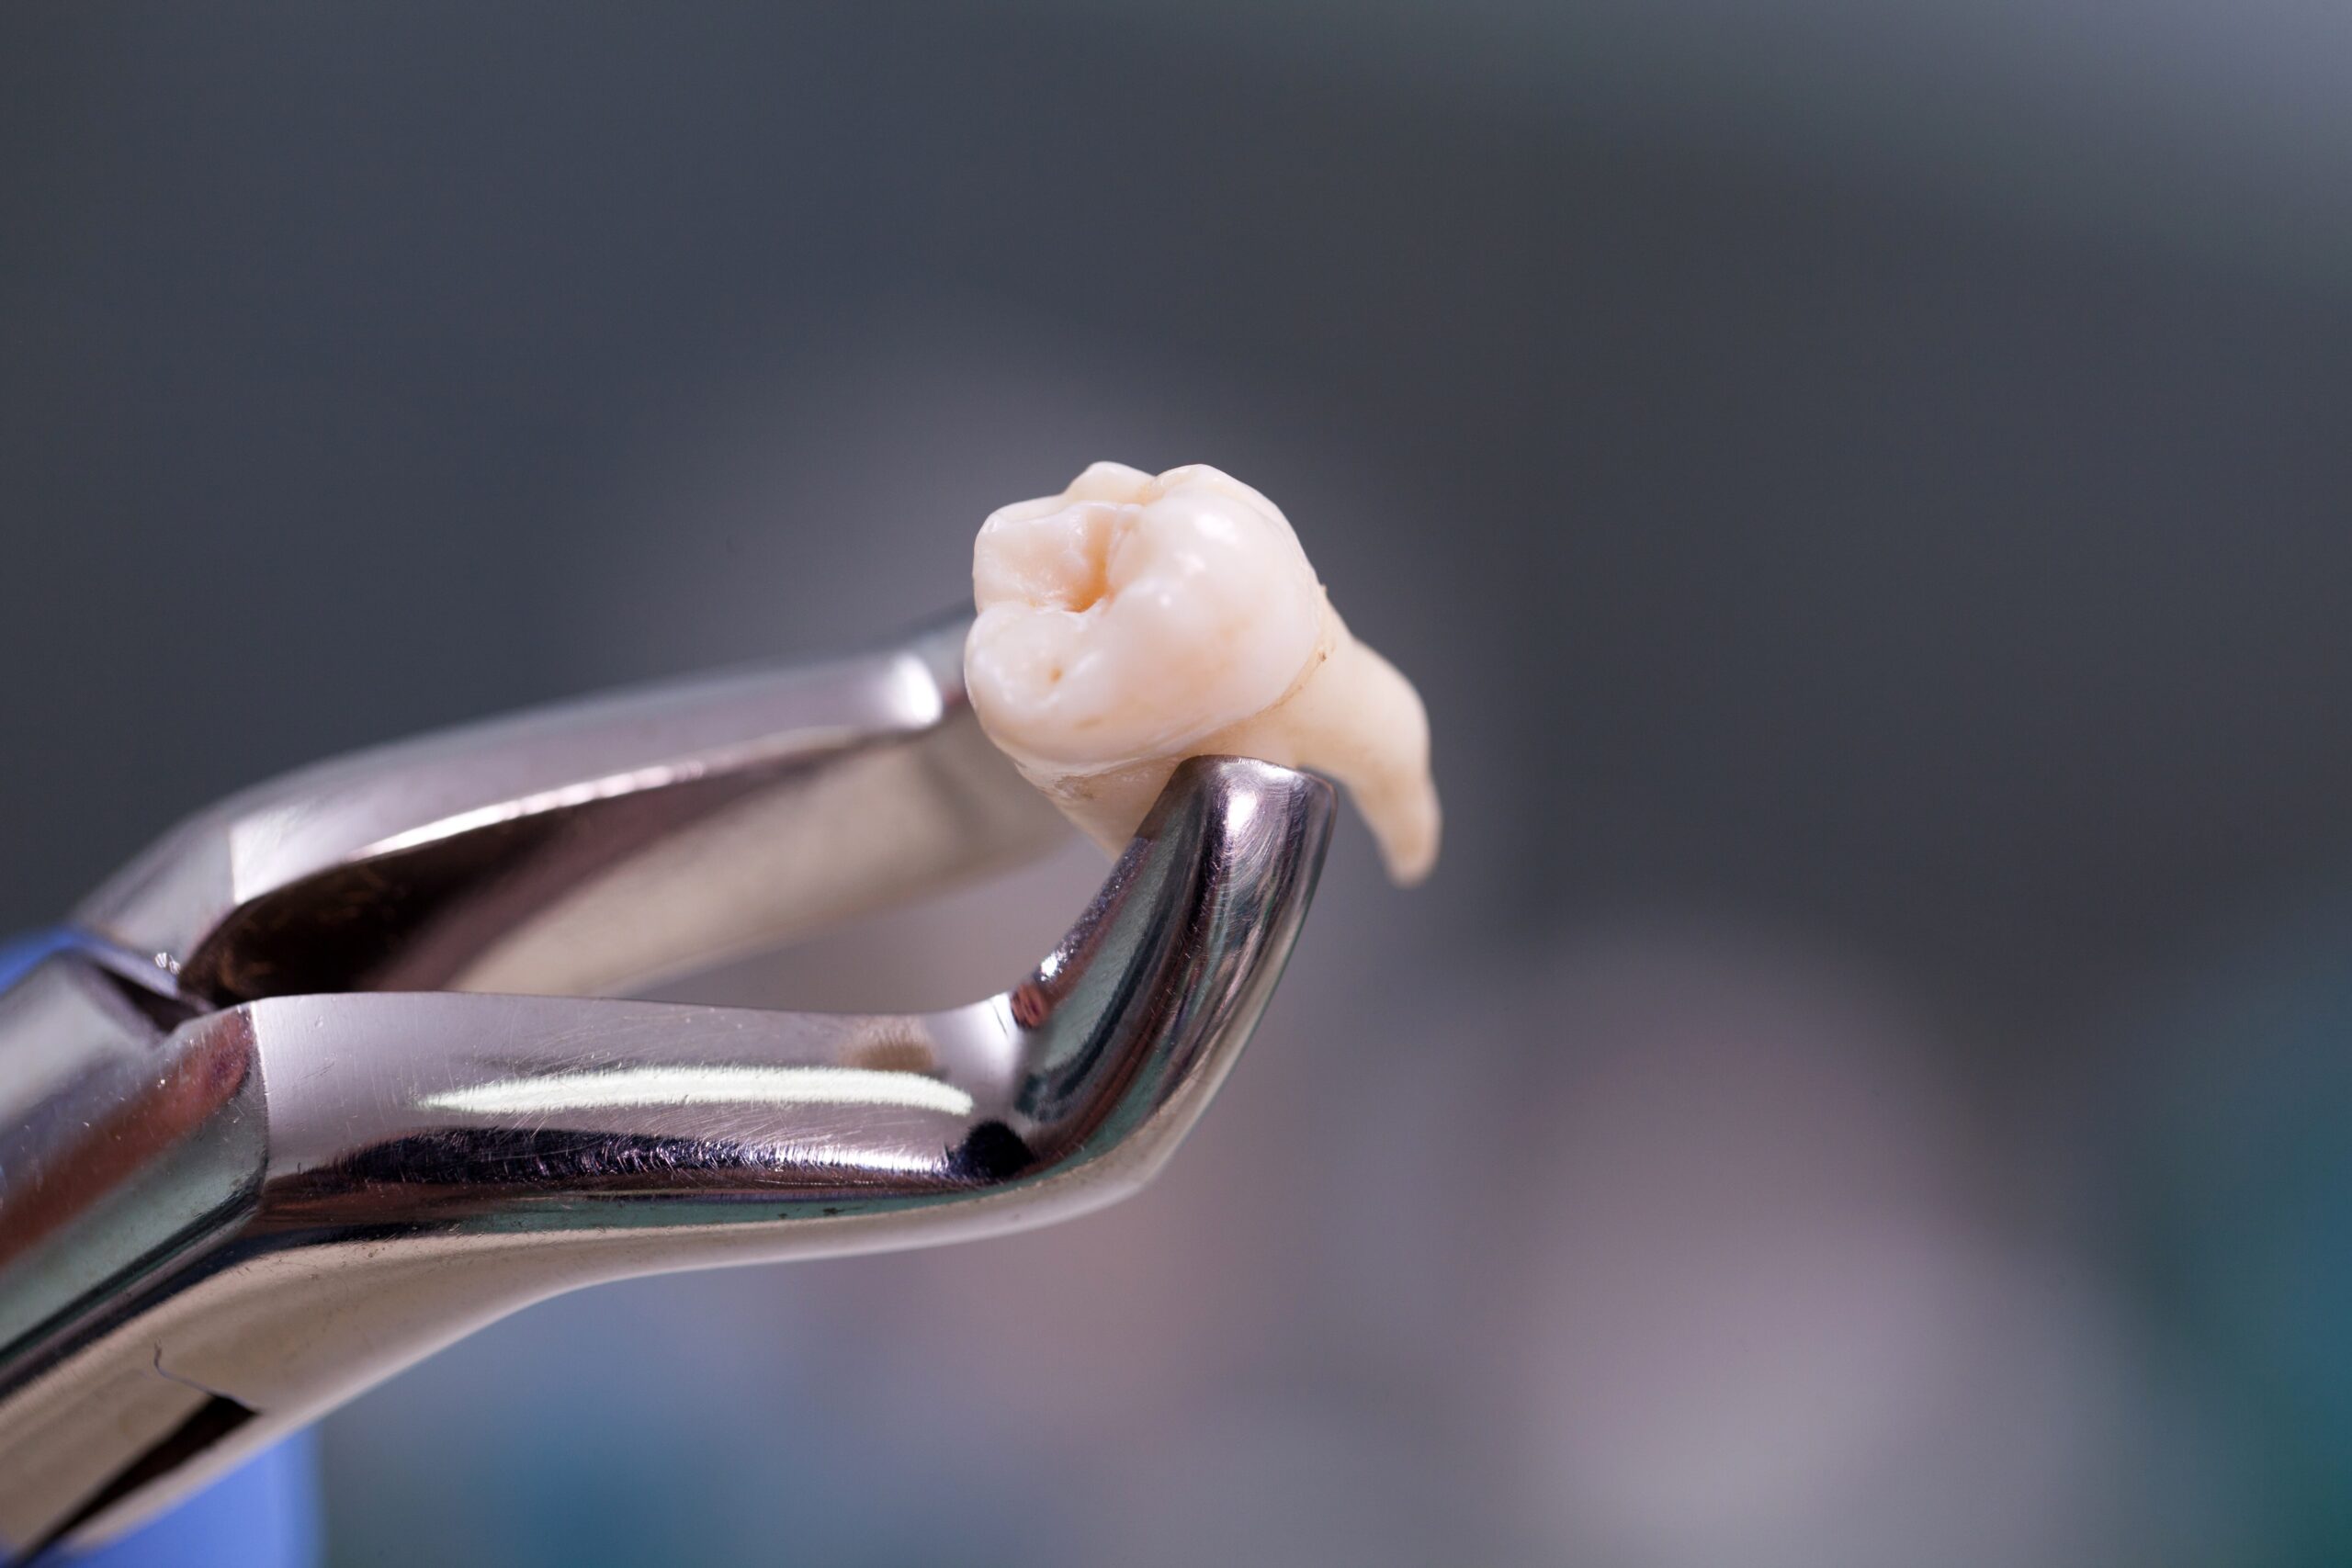 extracted tooth in forceps